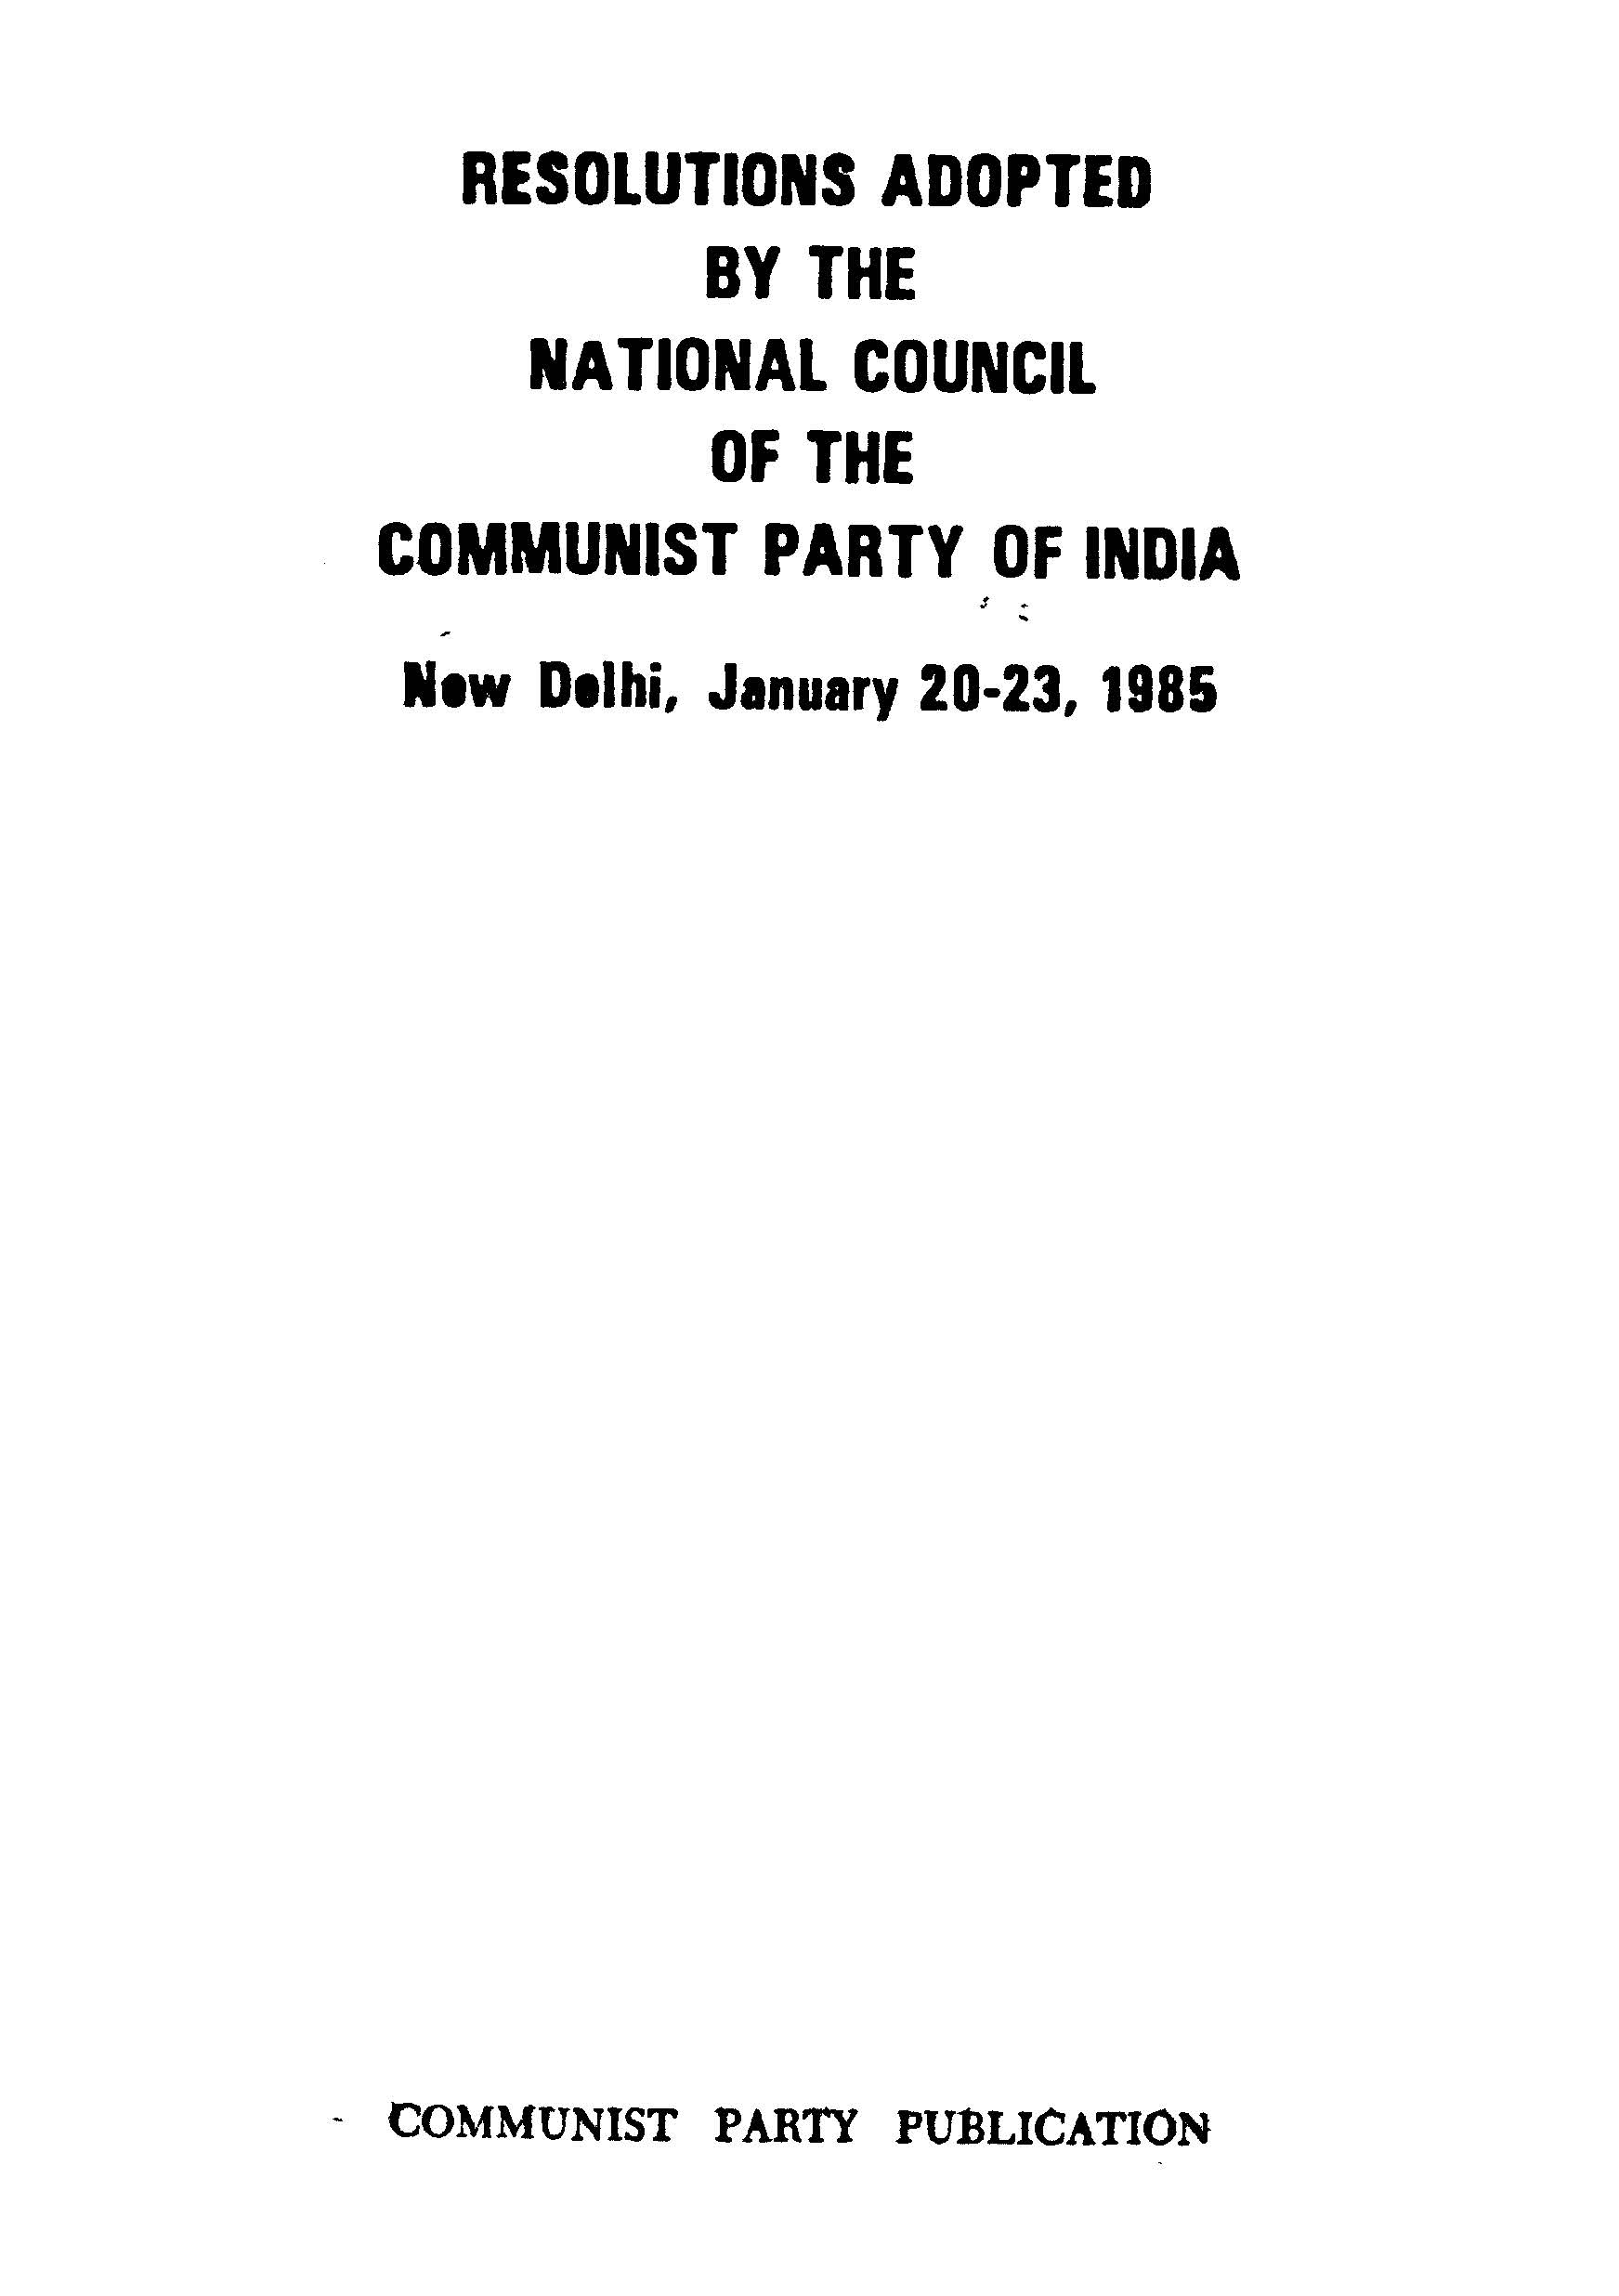 Resolutions adopted by the national council of the communist party of ondia (new delhi, 20-23, january,1985)